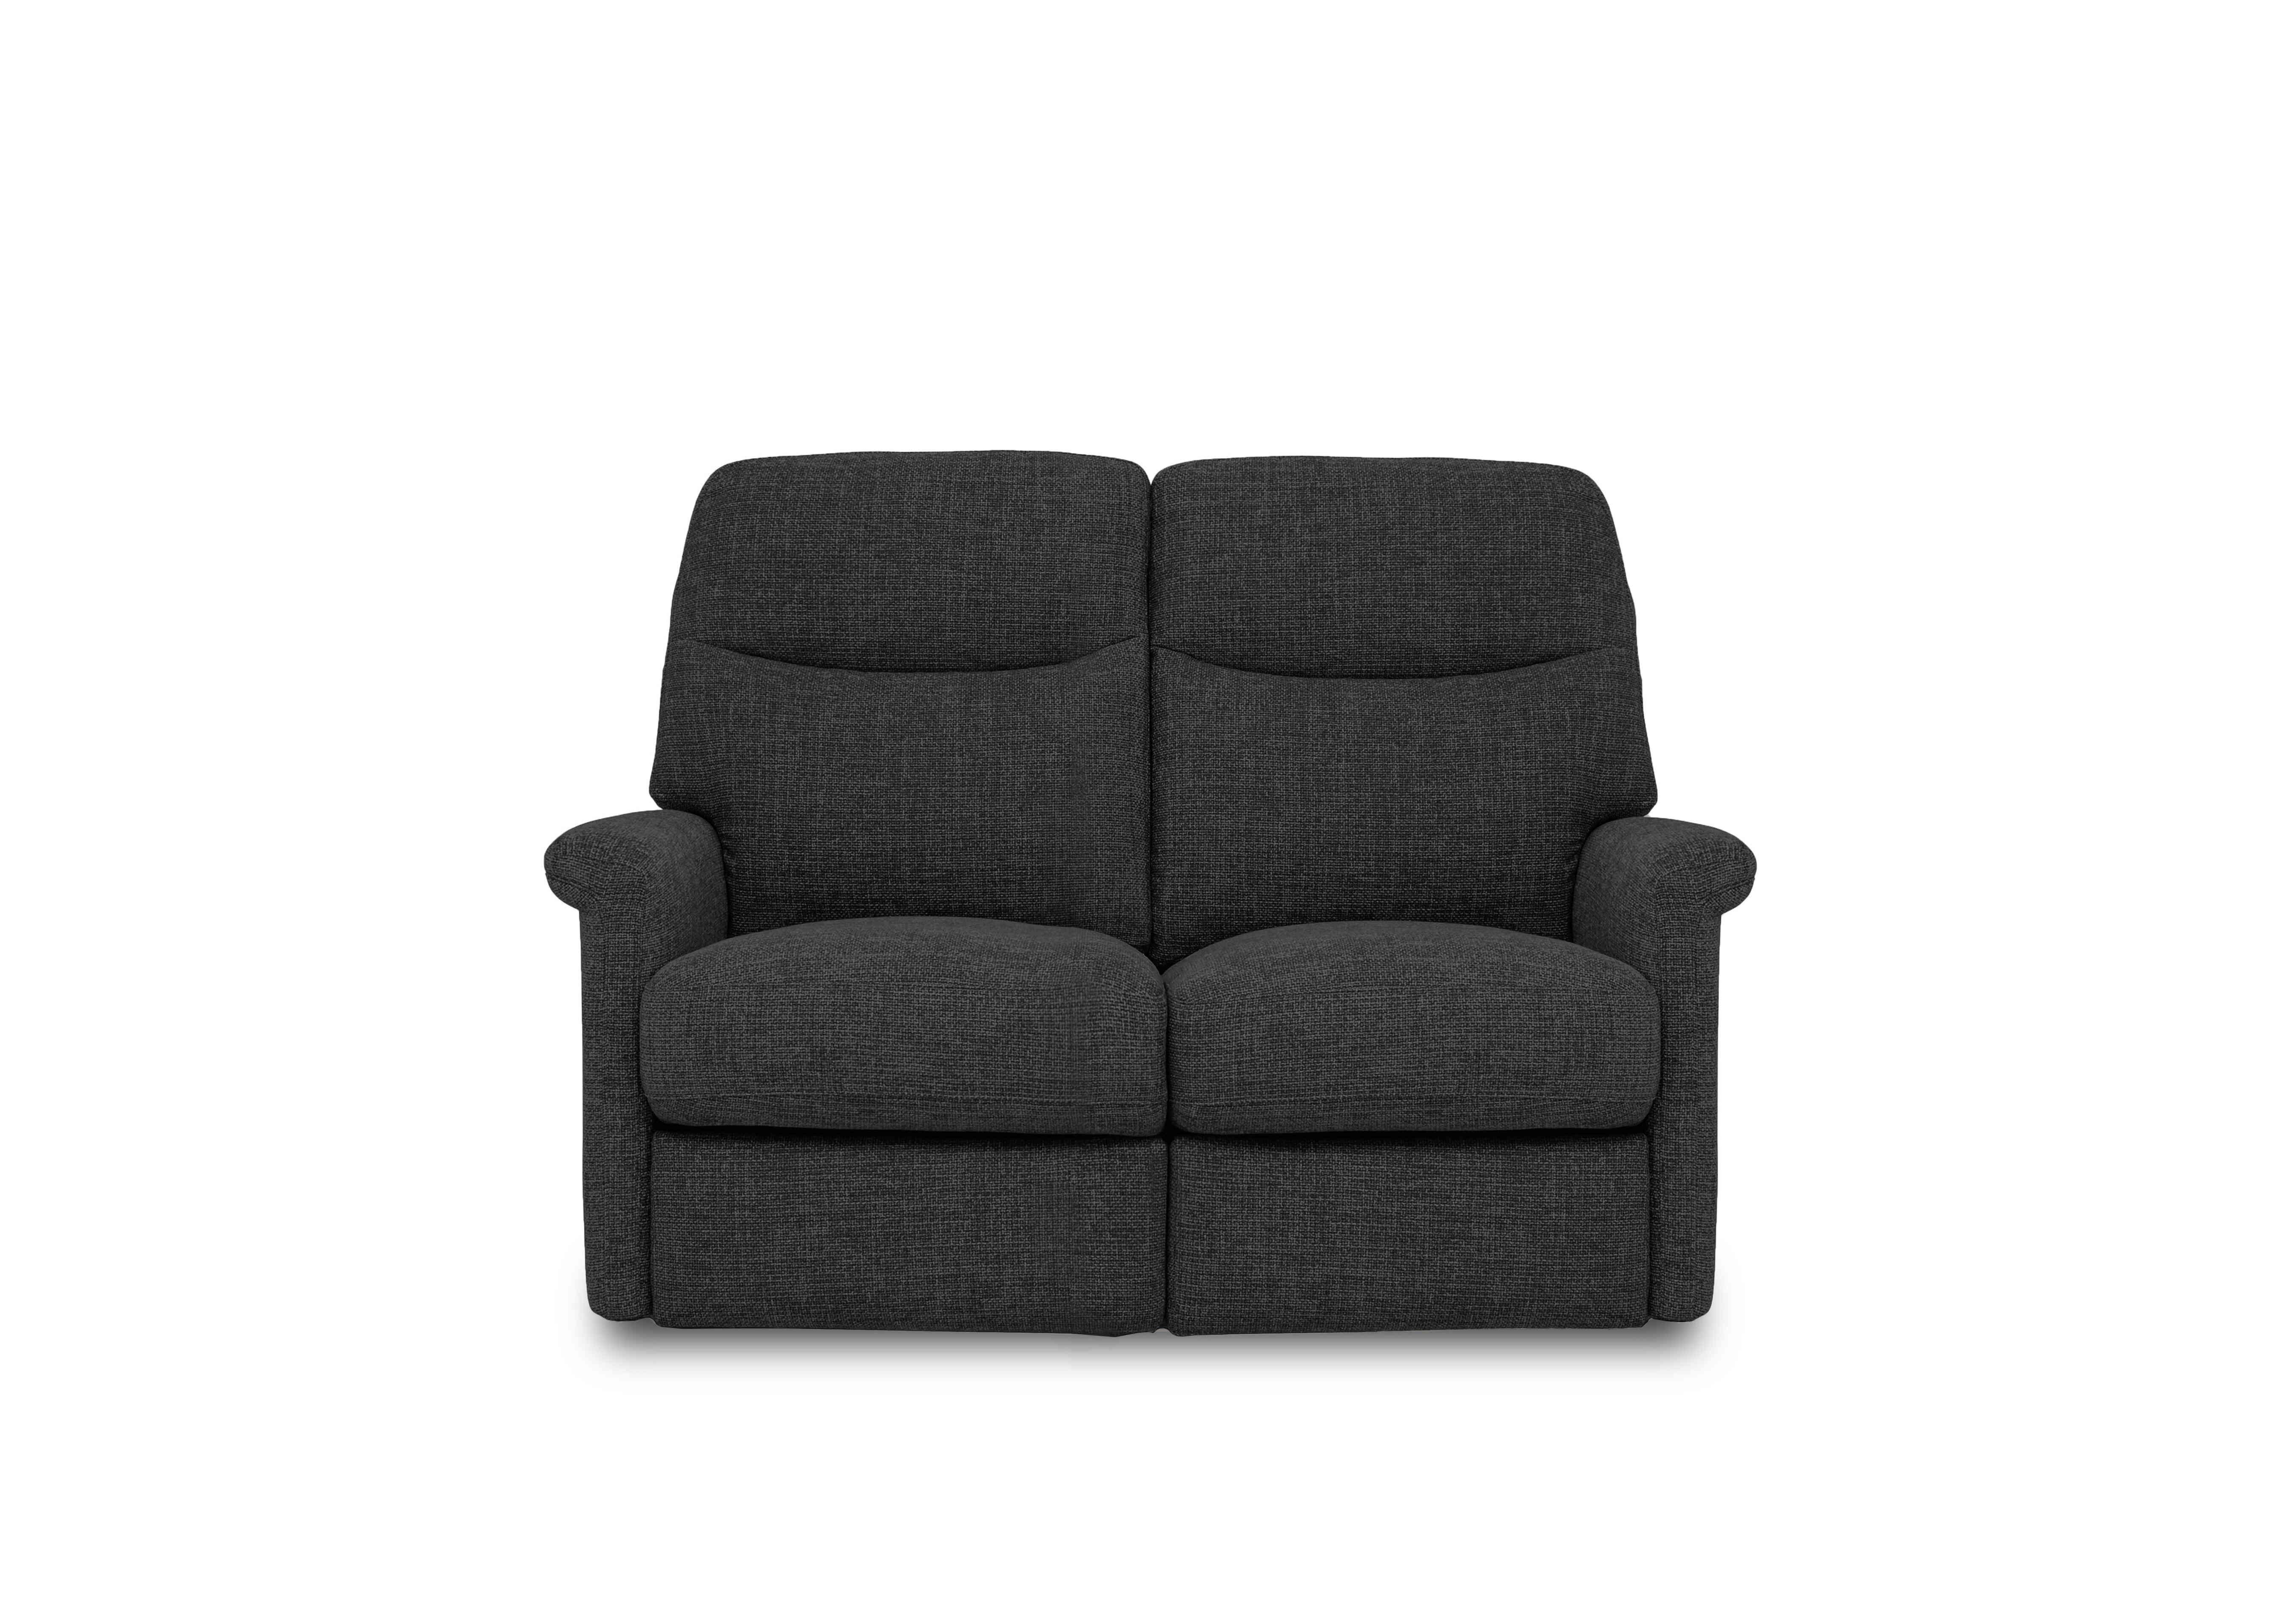 Compact Collection Lille 2 Seater Fabric Sofa in Fab-Cac-R463 Black Mica on Furniture Village